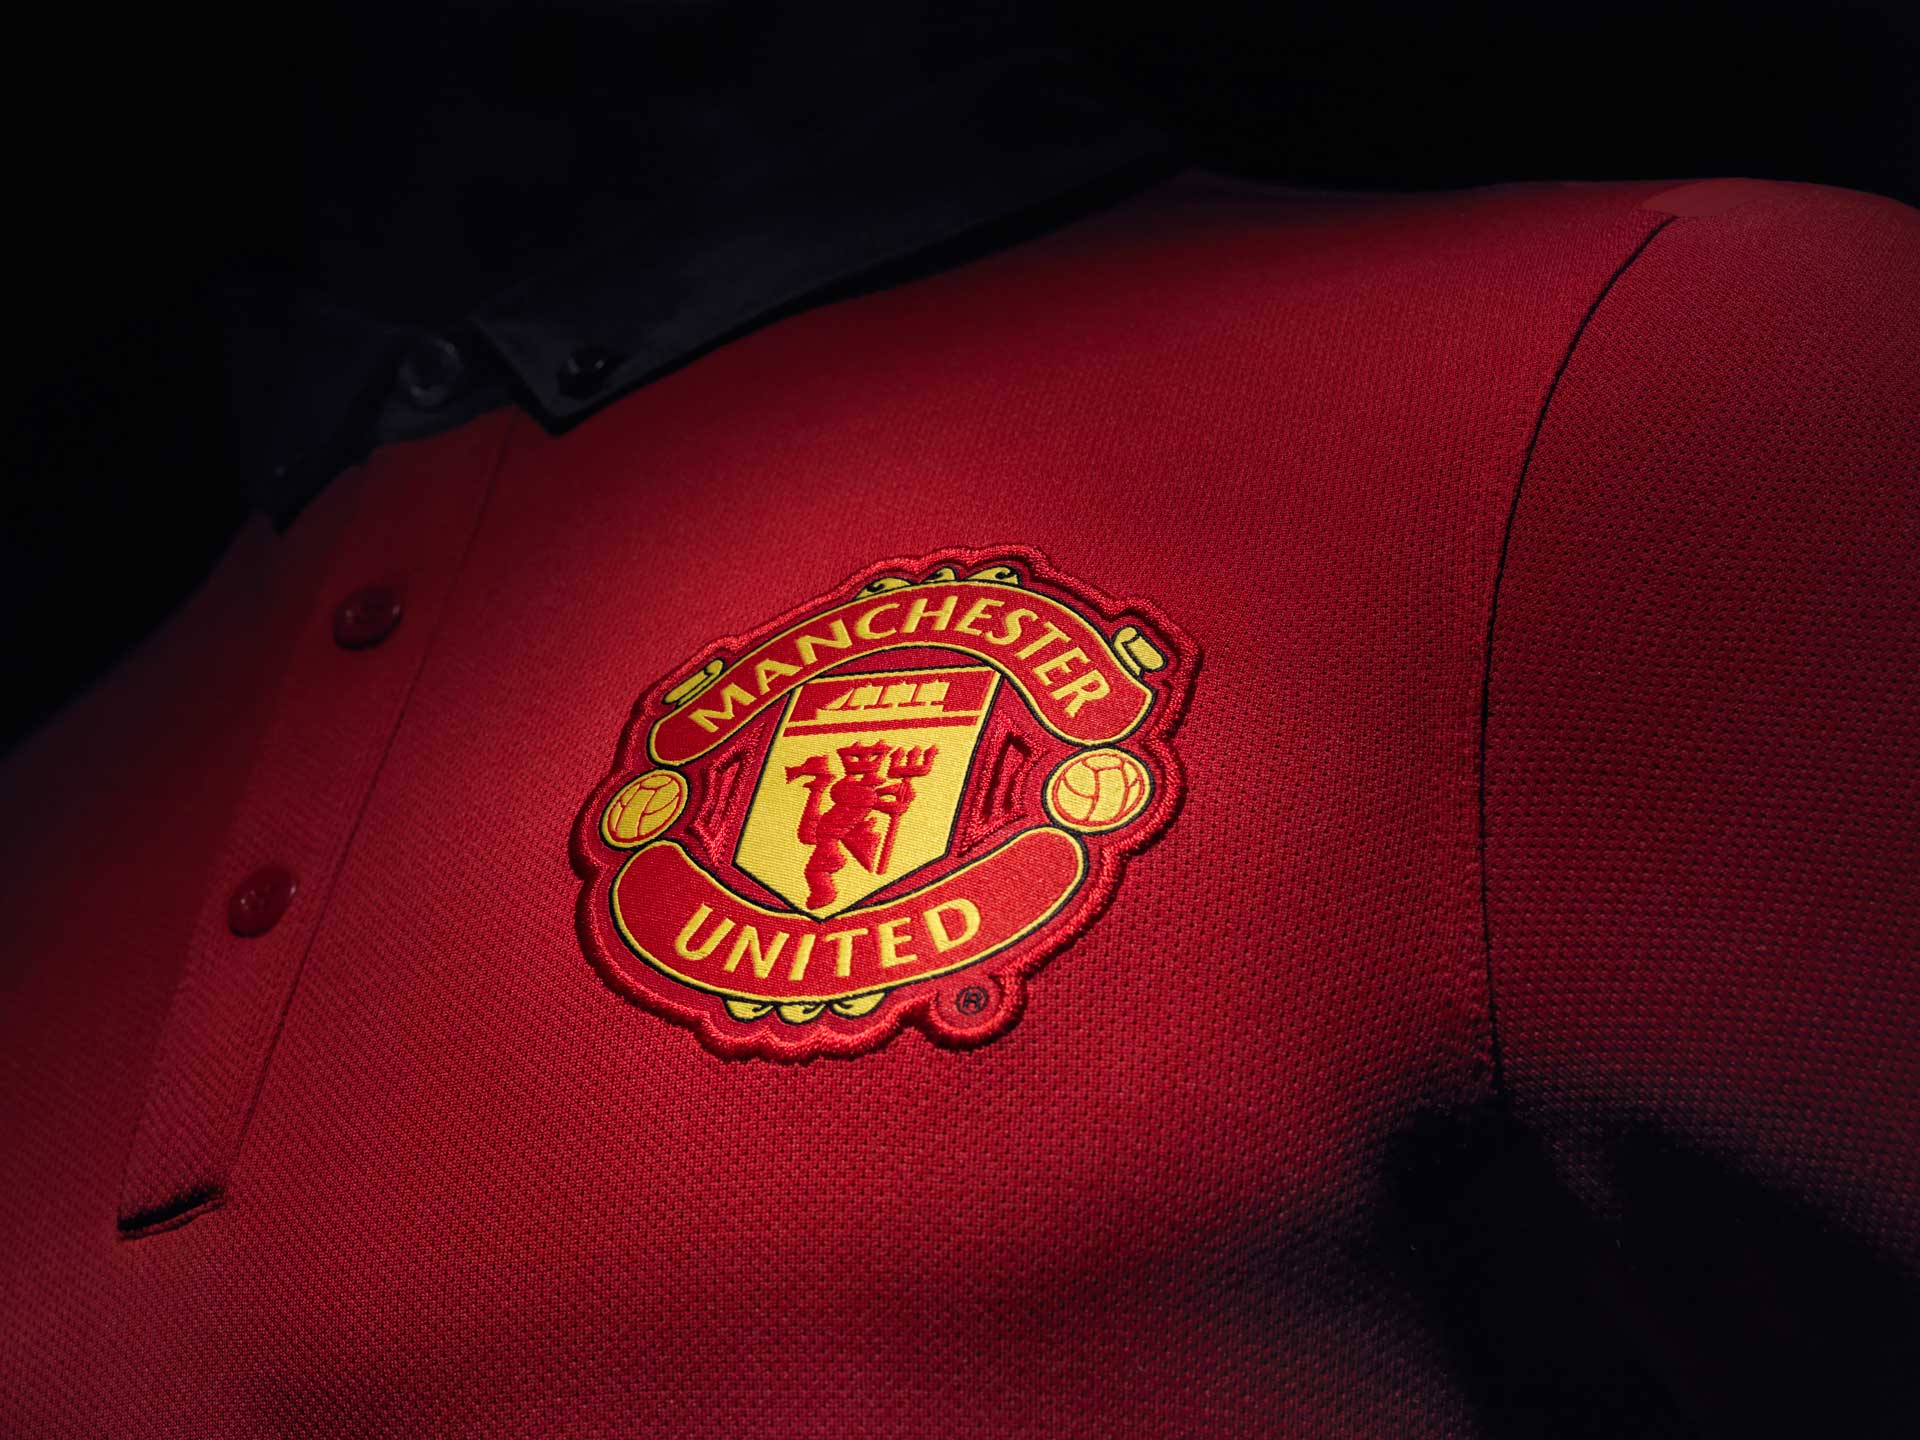 Best Logo Manchester United On Tshirt Wallpape Wallpapers